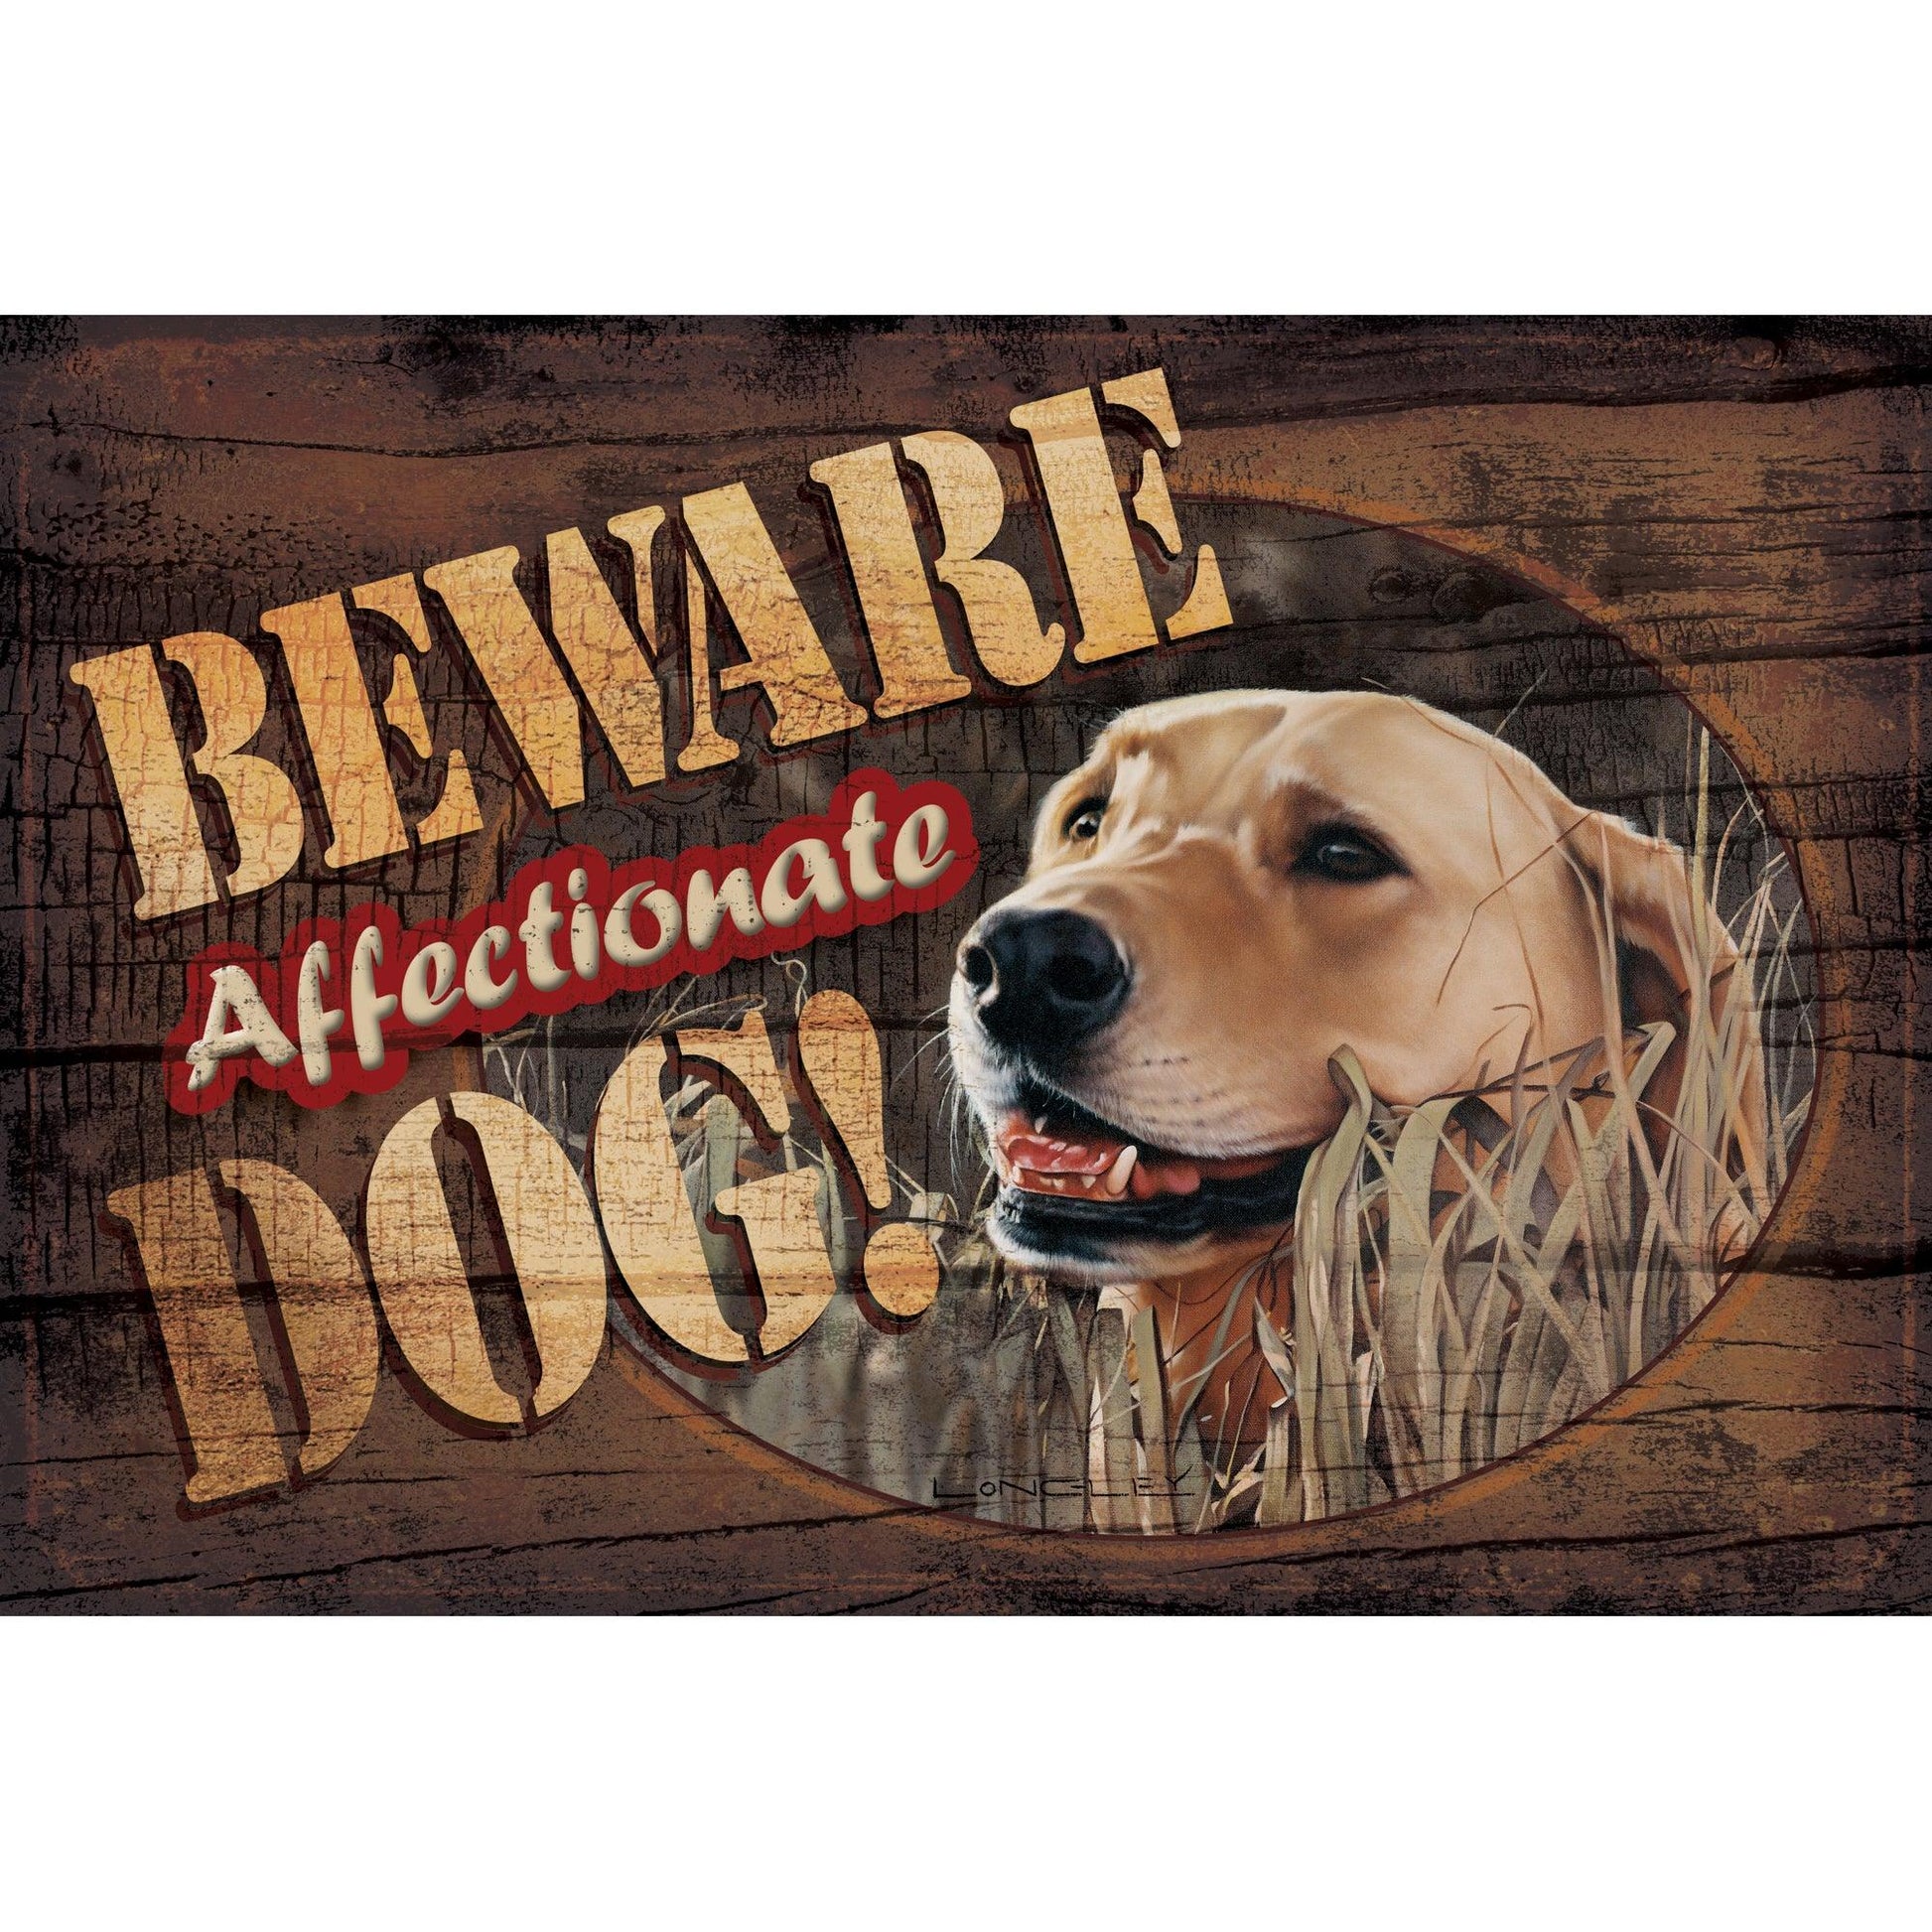 Beware Affectionate Dog 8" x 12" Wood Sign - Wild Wings